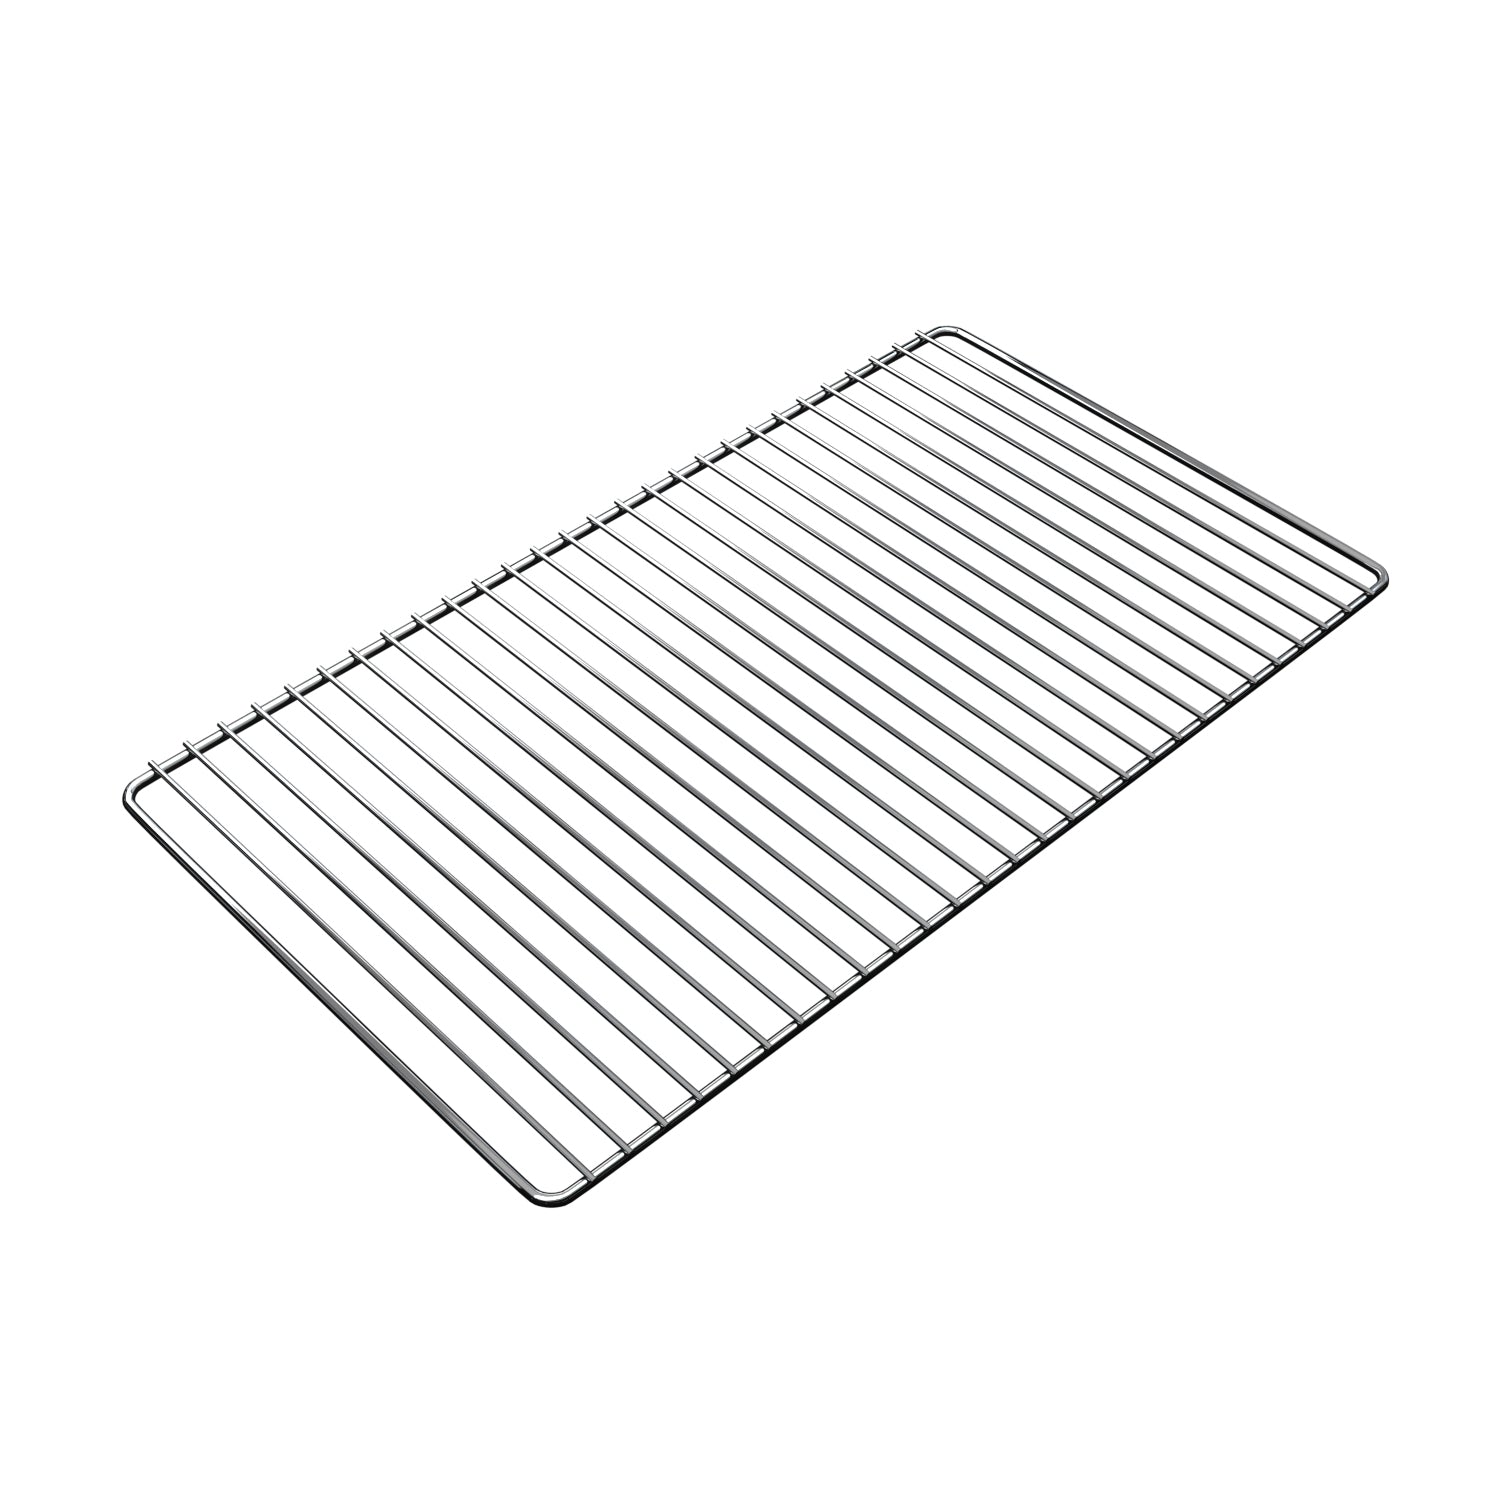 Grate for Beelonia drying cabinet